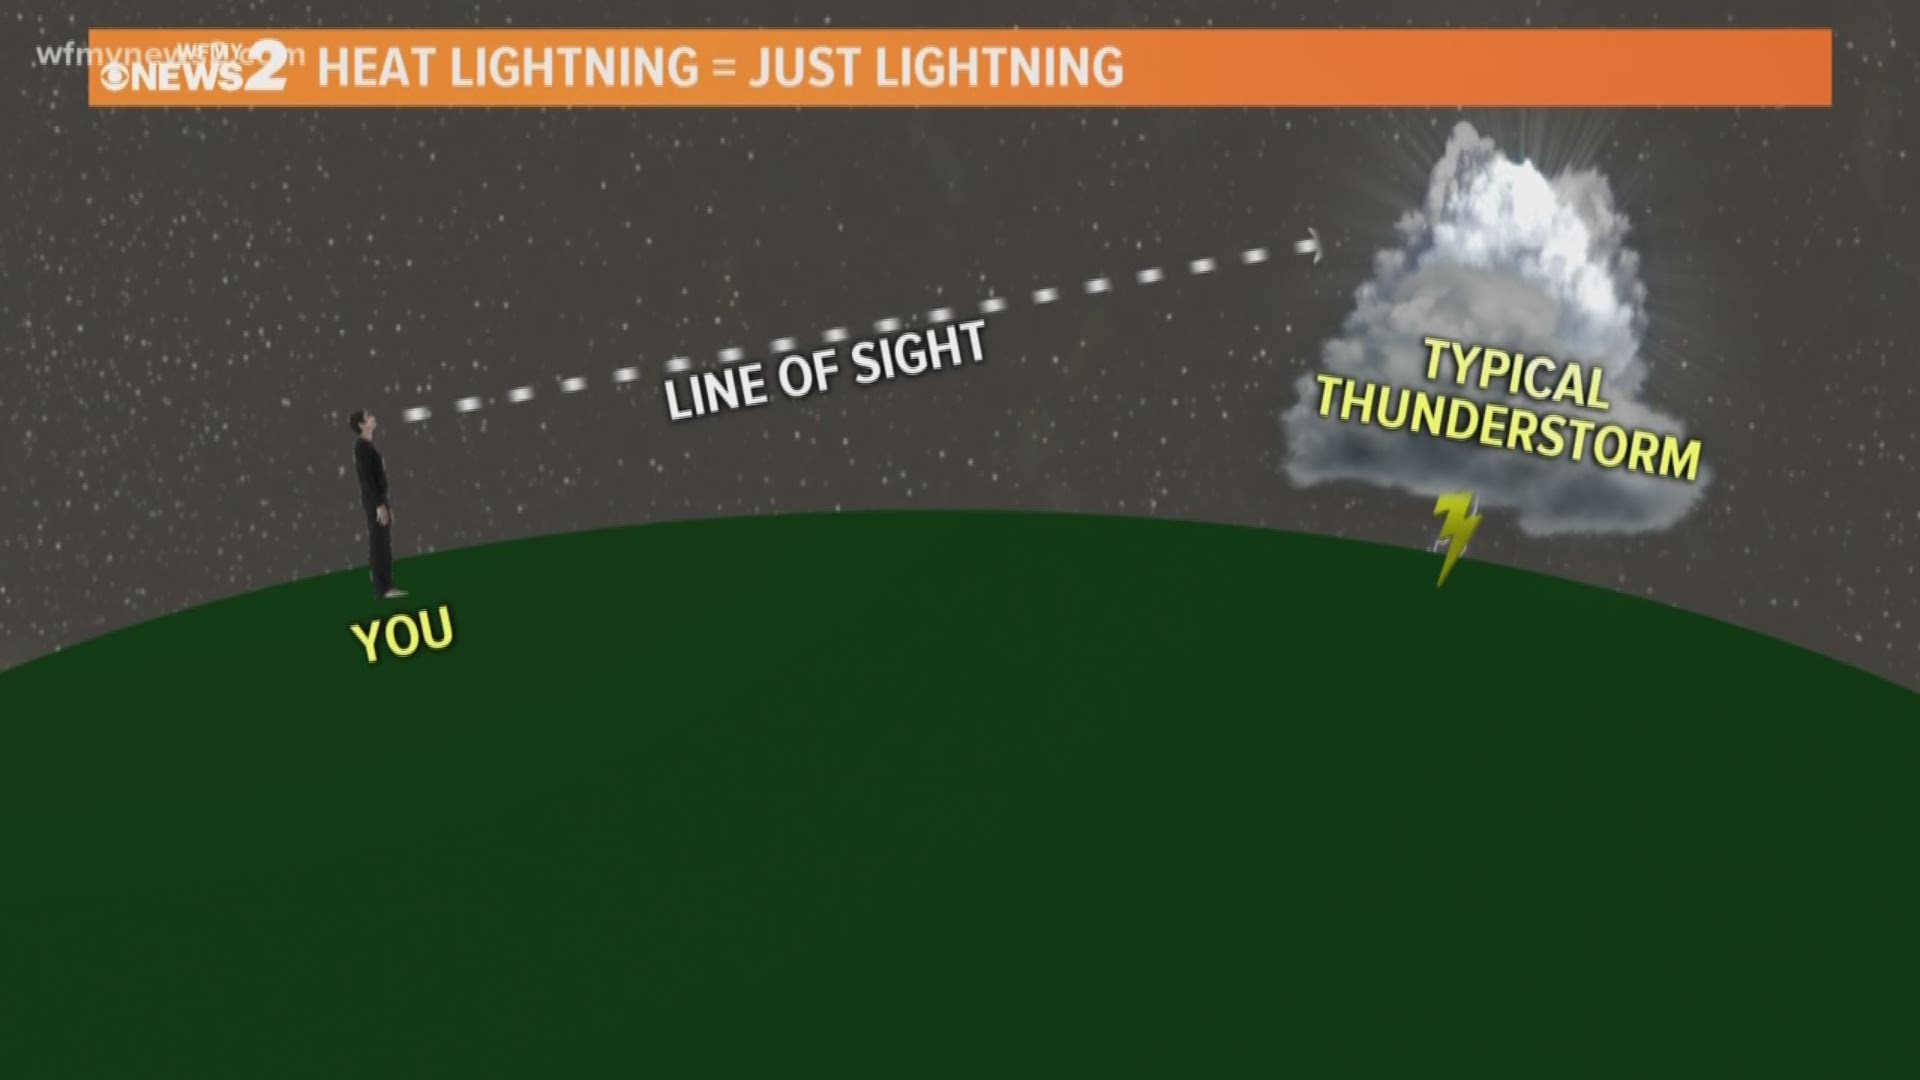 You see it often during the summer, that’s lightning from a distance. But is heat lighting a real thing? Check this out.